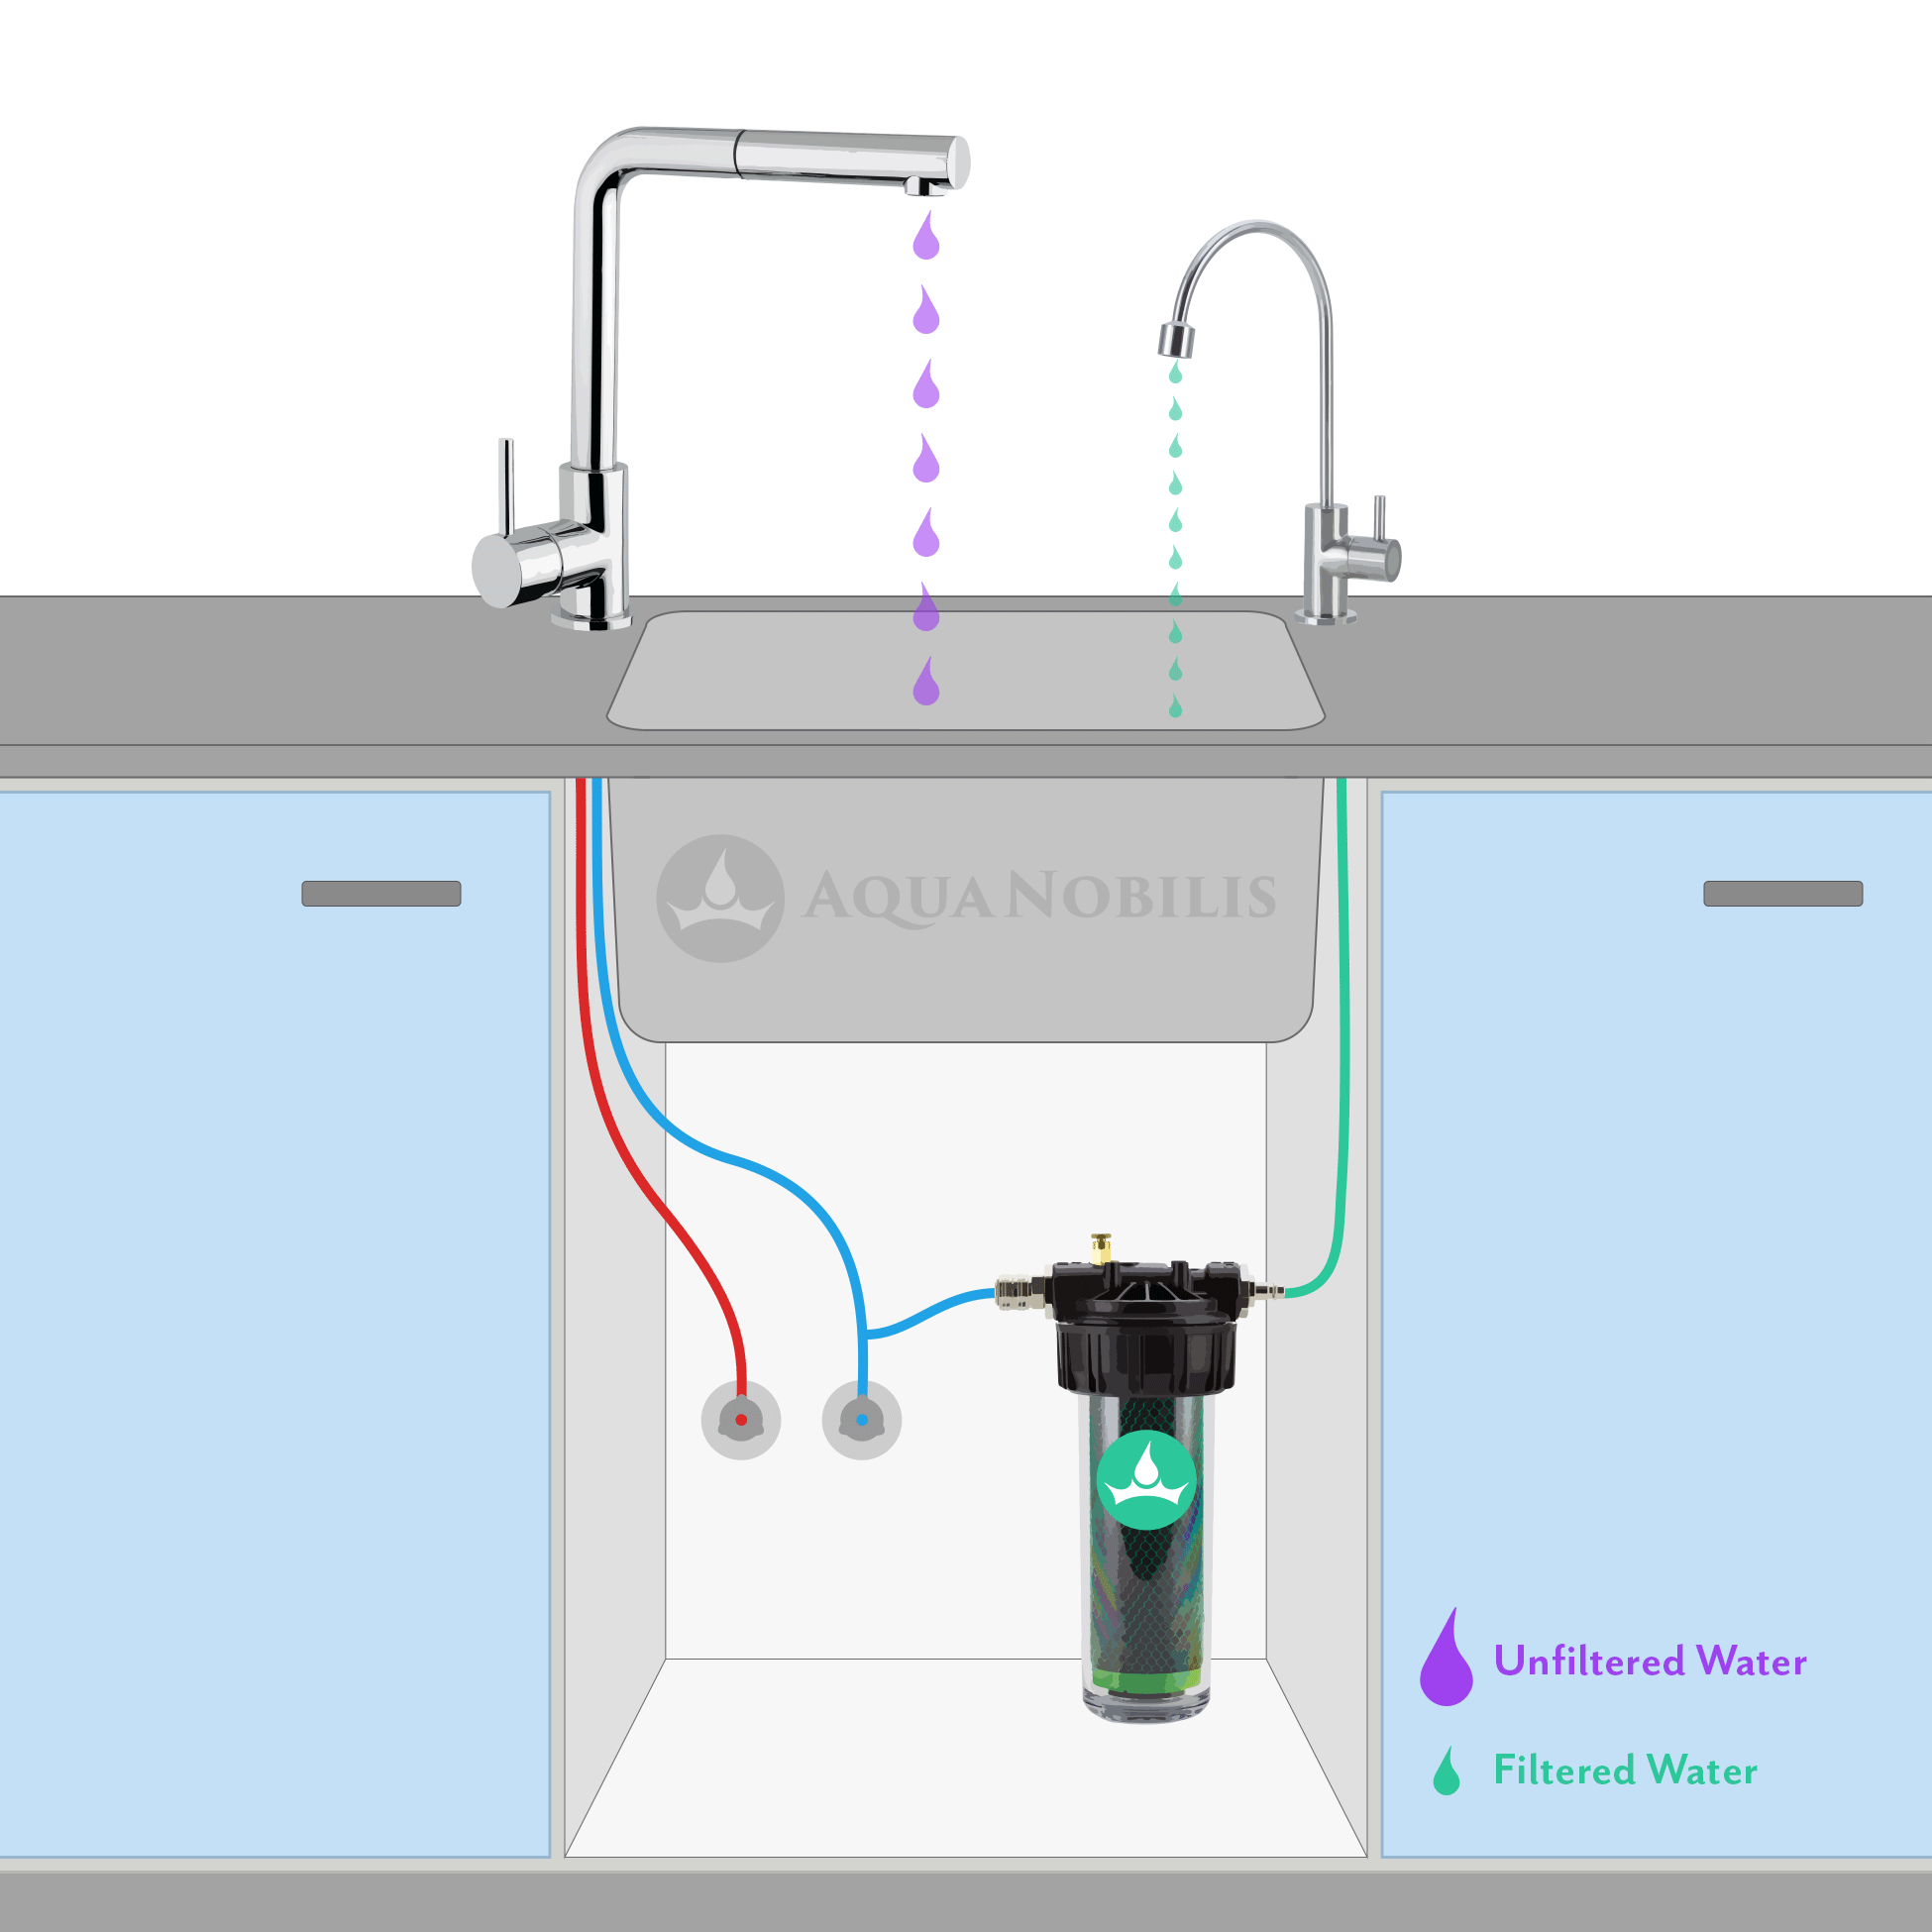 Animated connection diagram of a 1-way tap with under-sink water filter